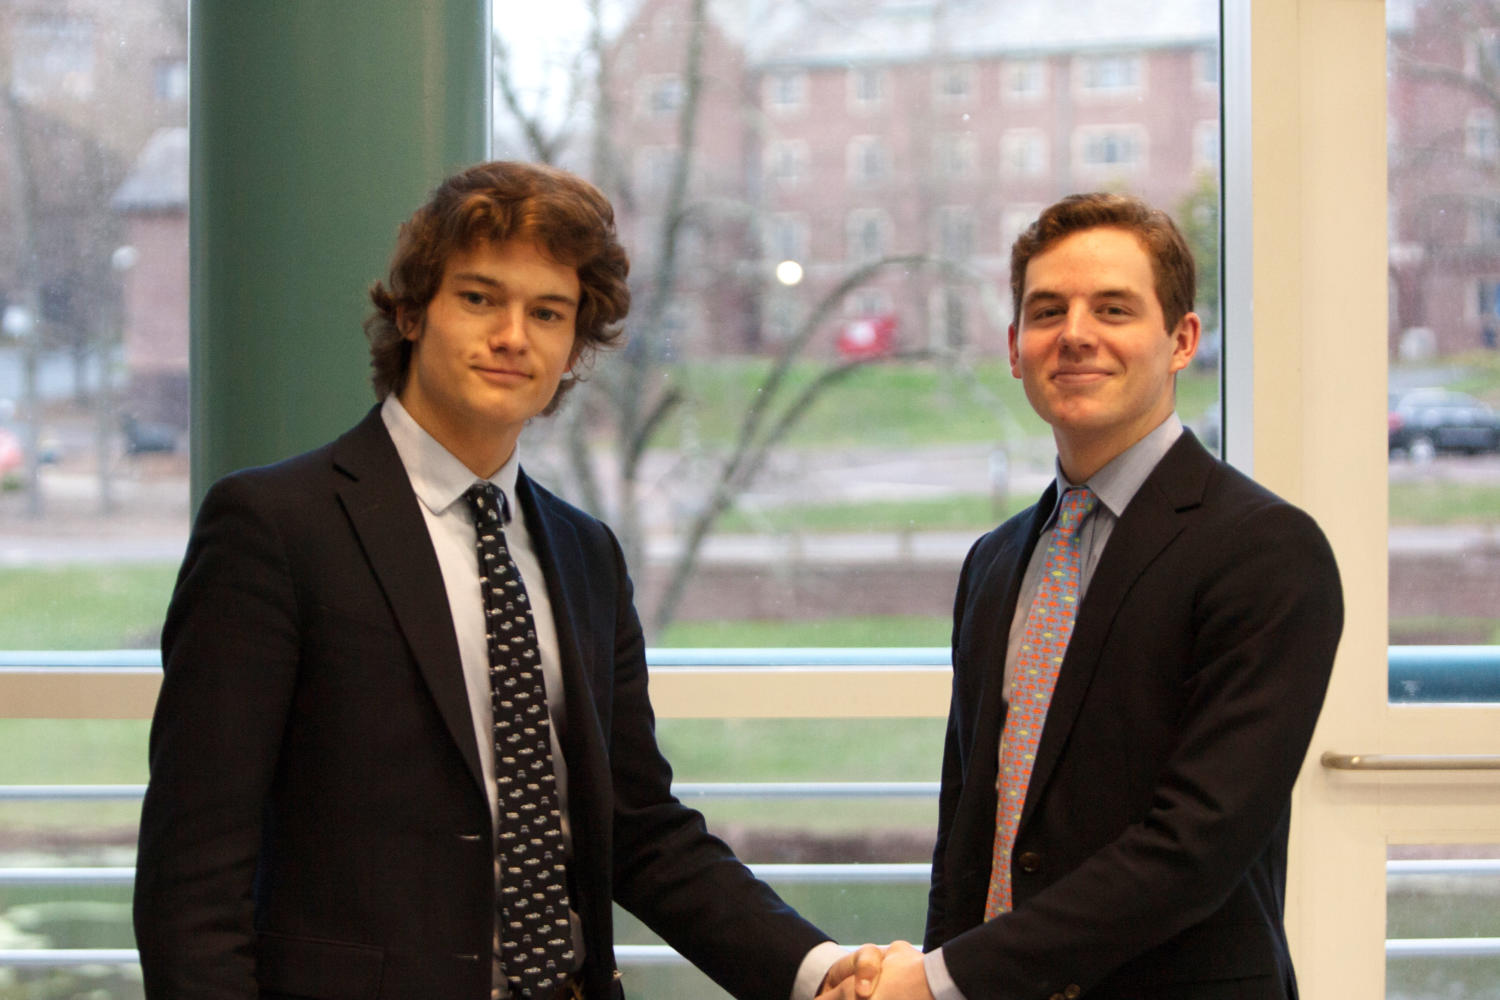 Garrett George ’19 elected SGA President, with Max Moore ’19  serving as the Vice President